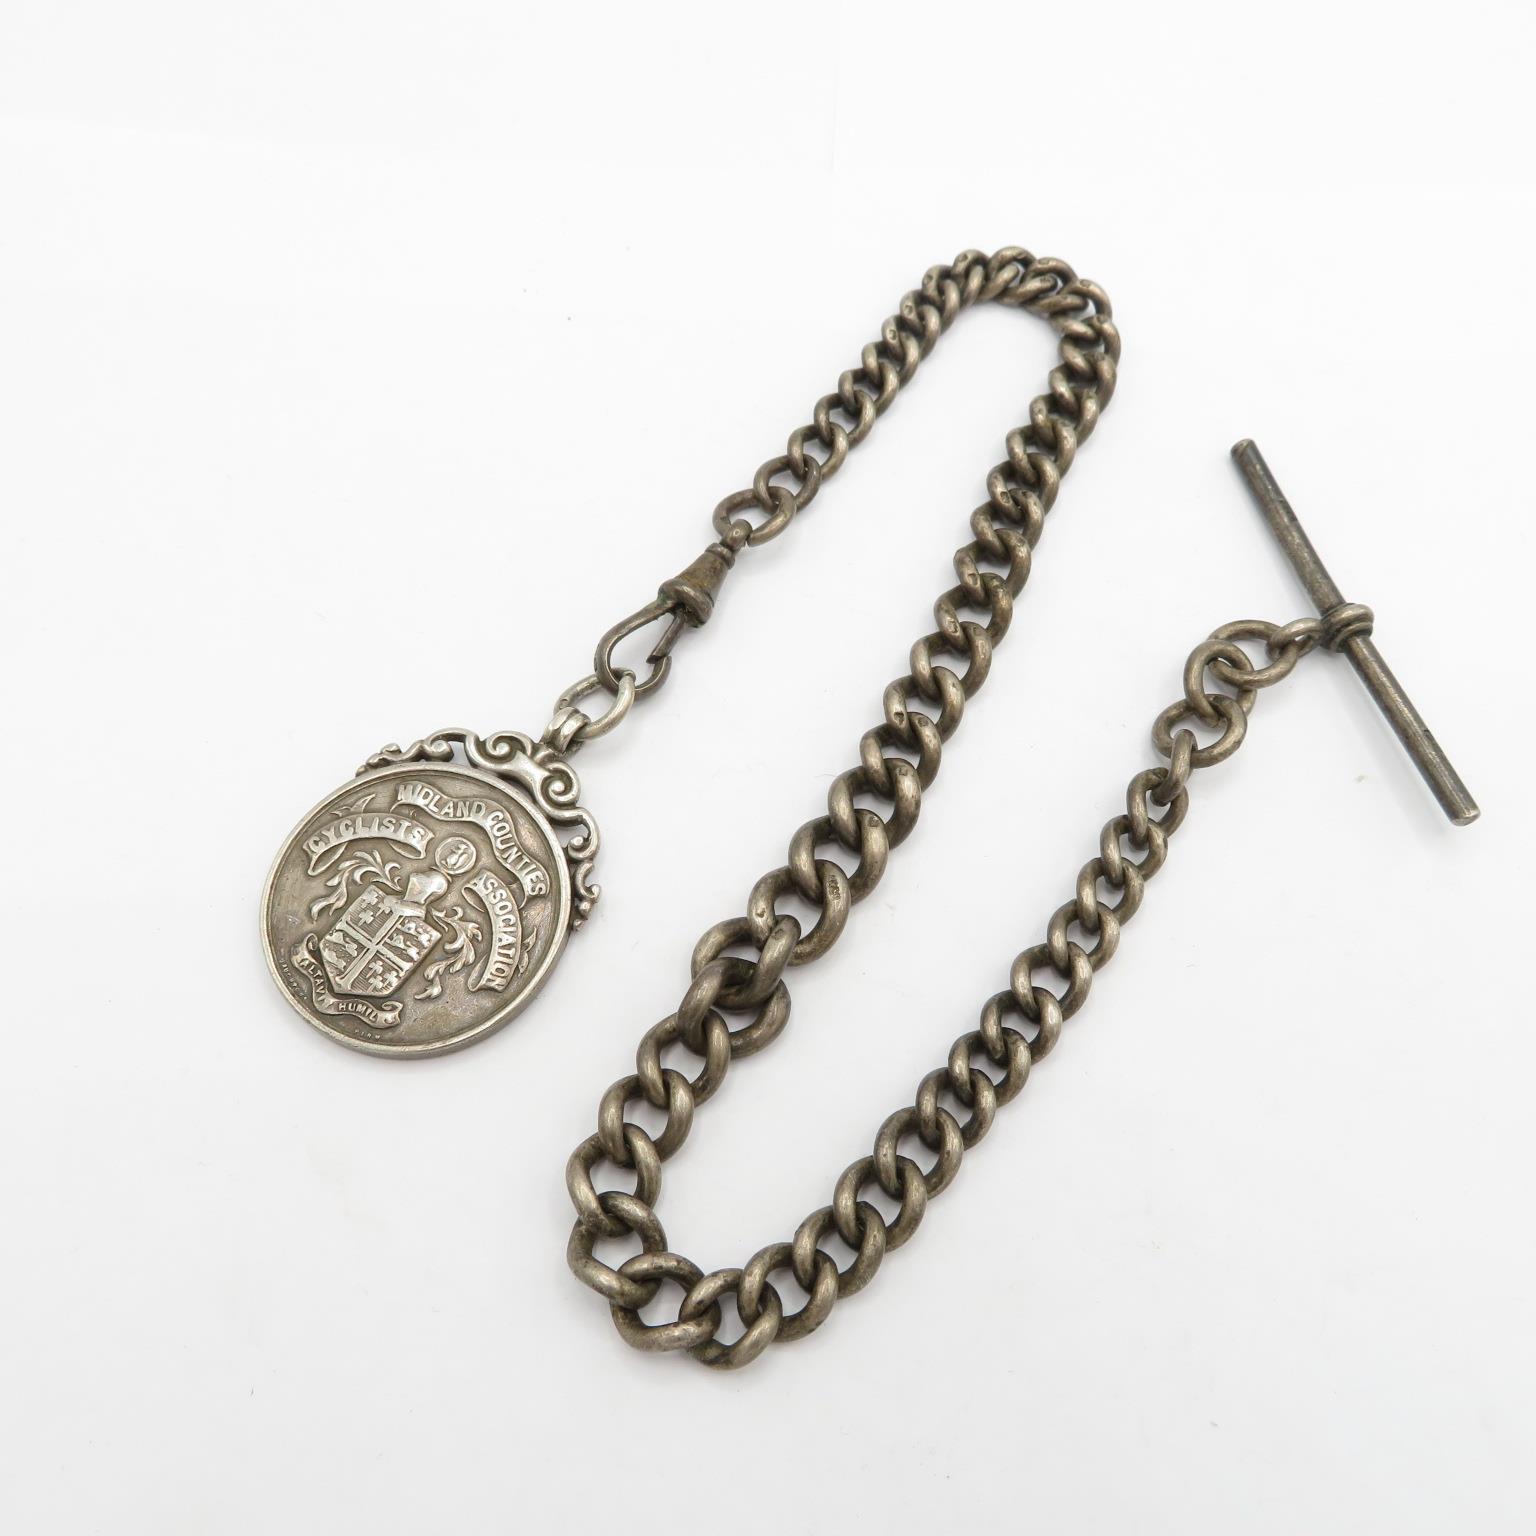 Watch chain and fob 30cm long 61g